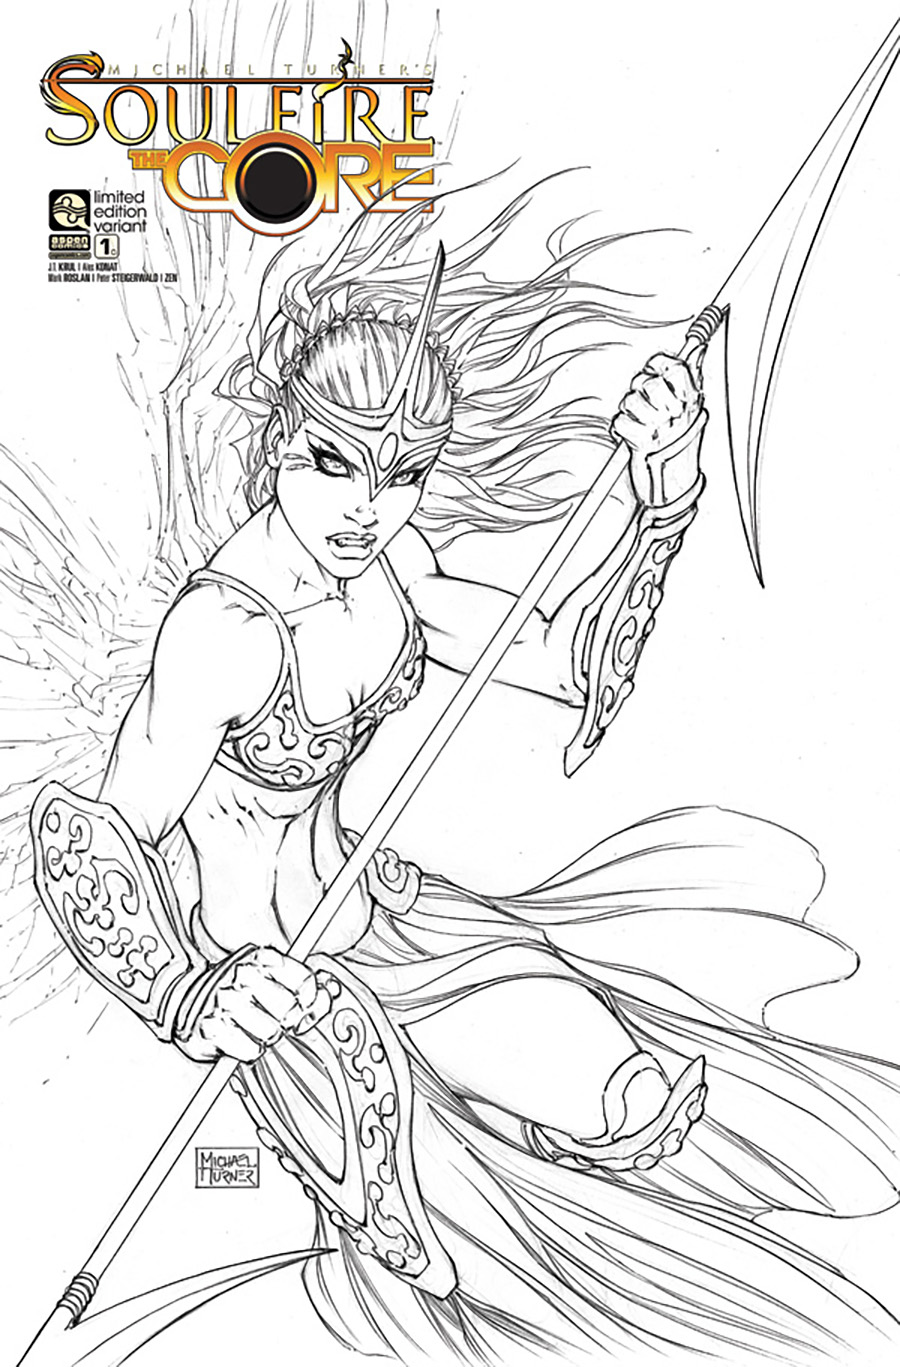 Soulfire The Core #1 Cover C Variant Michael Turner Sketch Cover